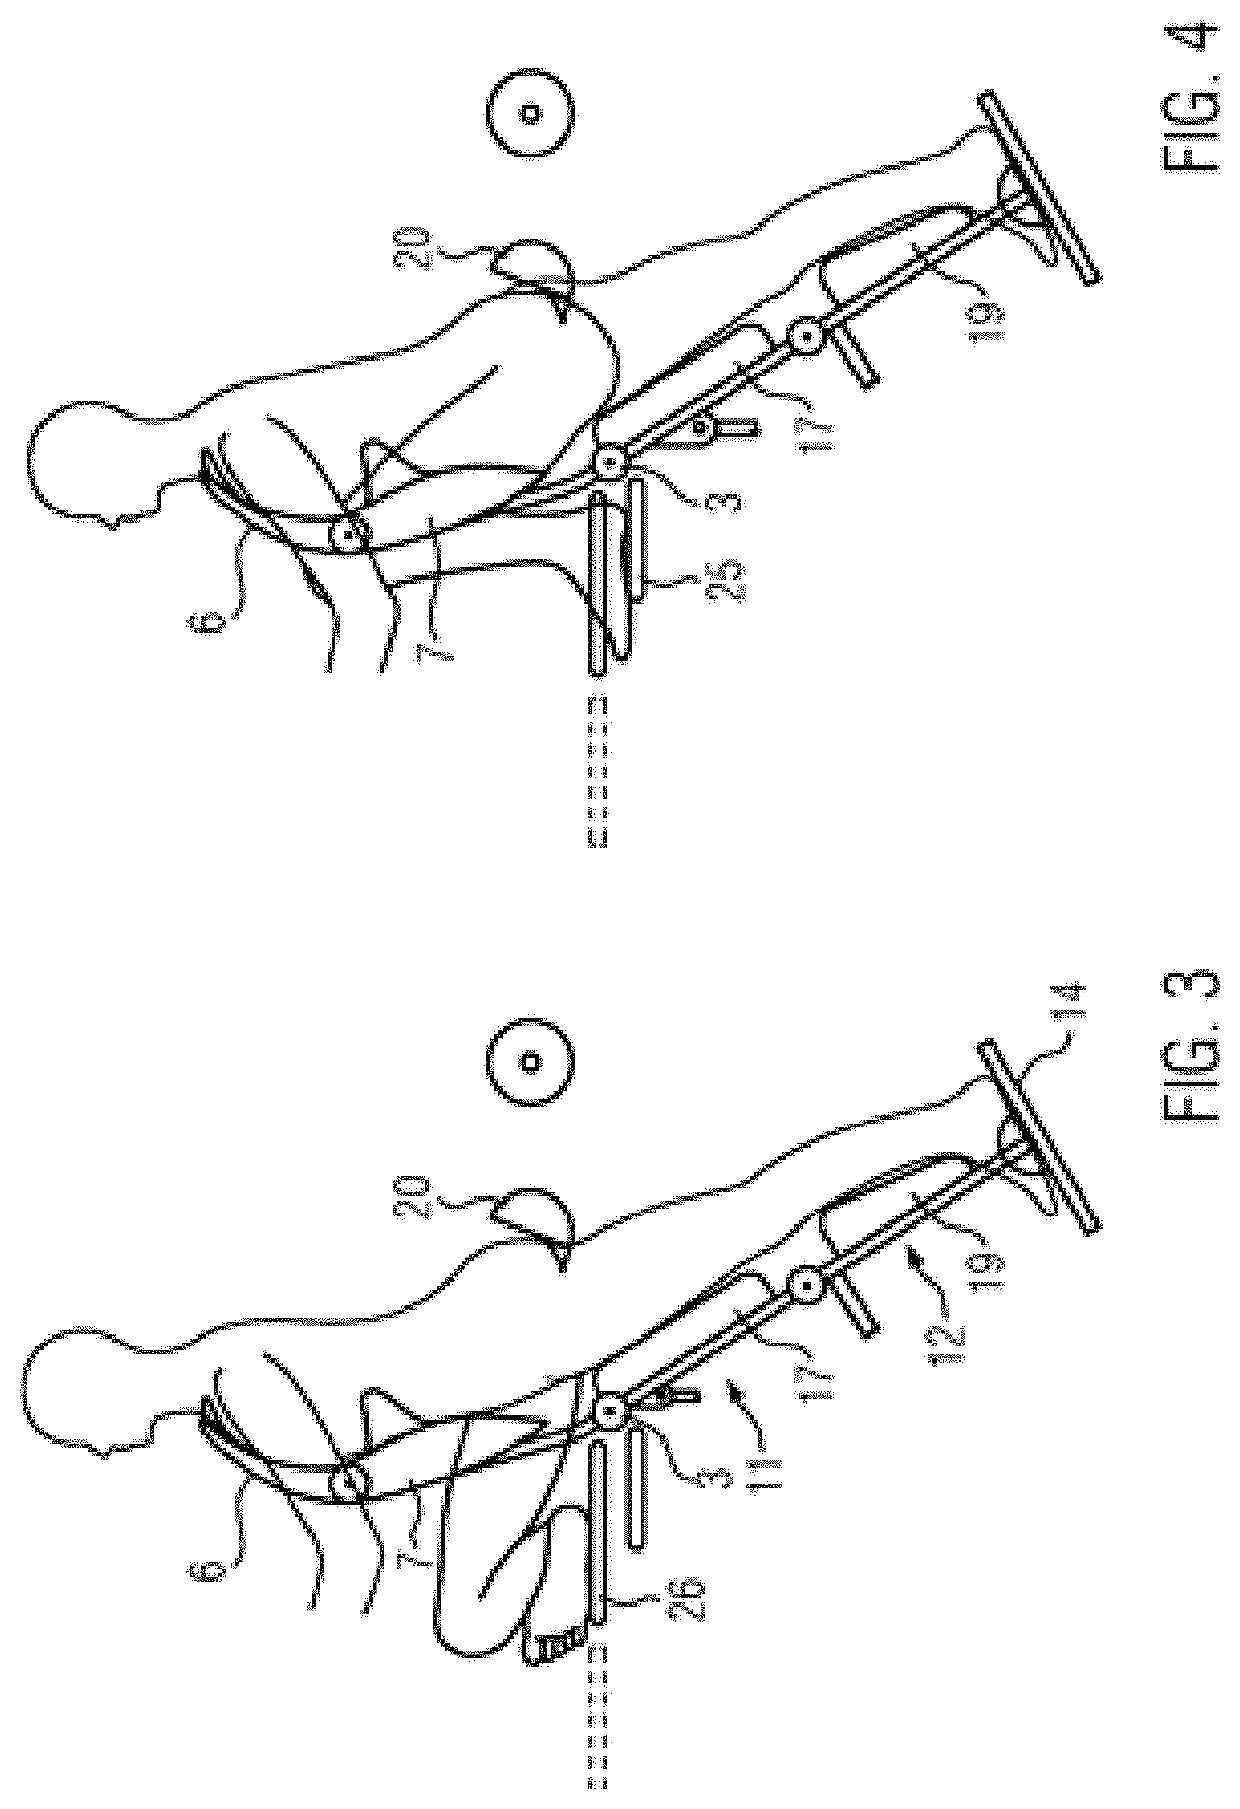 Chair, pressing device